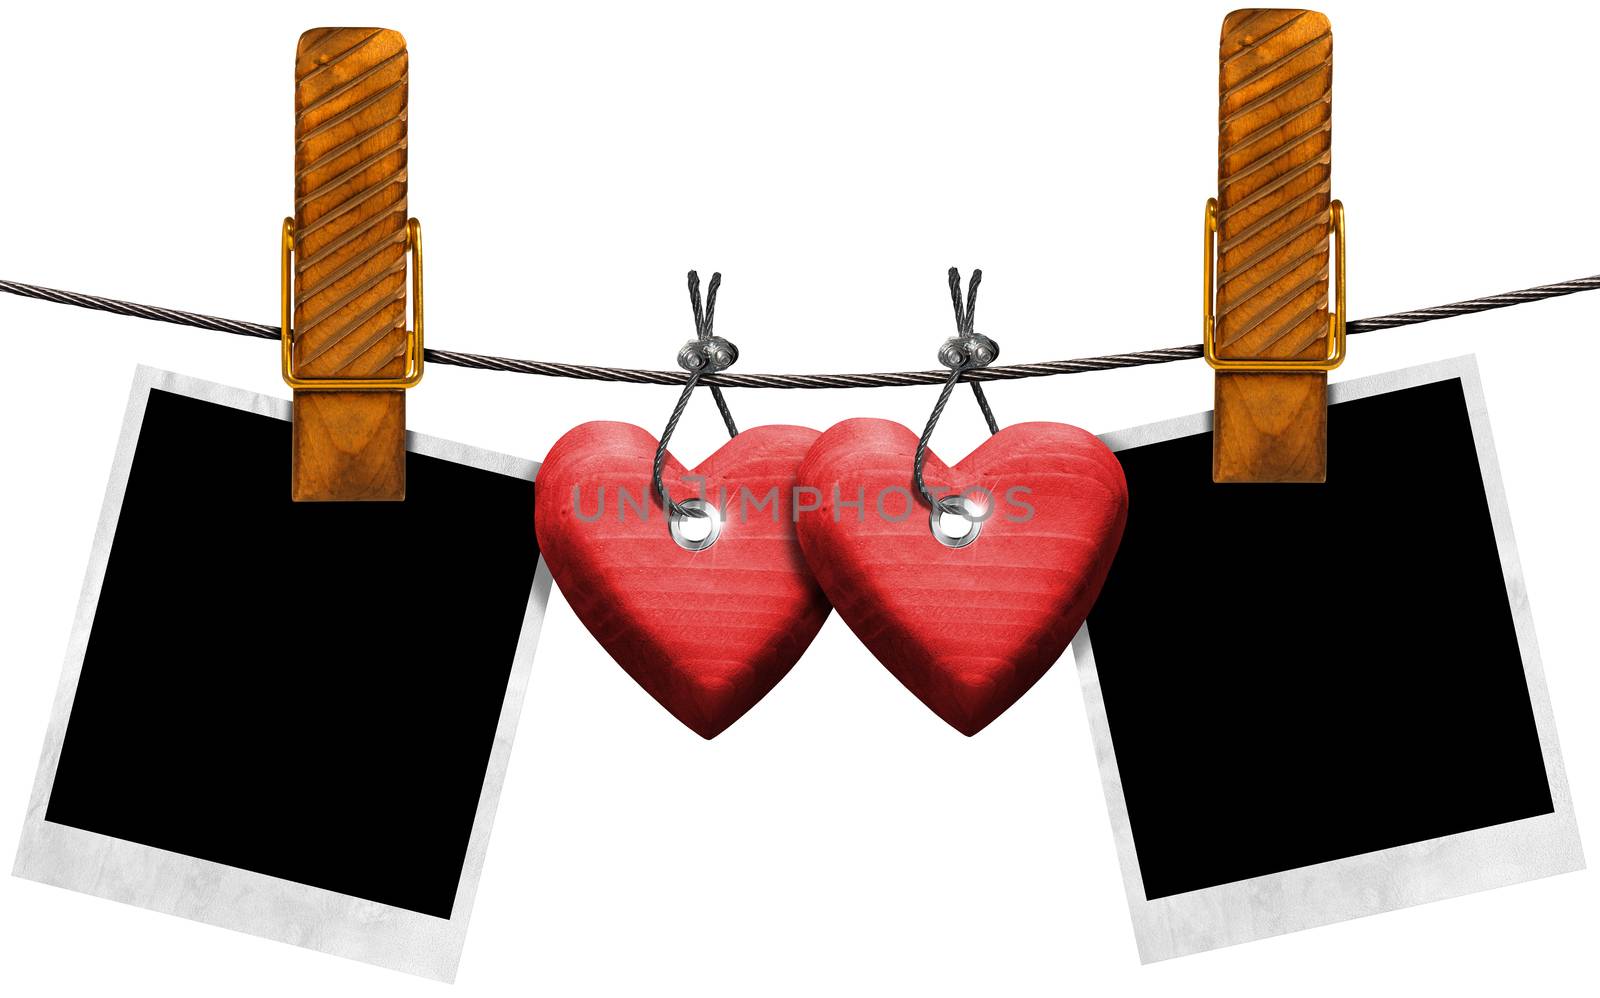 Two blank photos and two red wooden hearts hanging on a steel cable with large clothespin 

